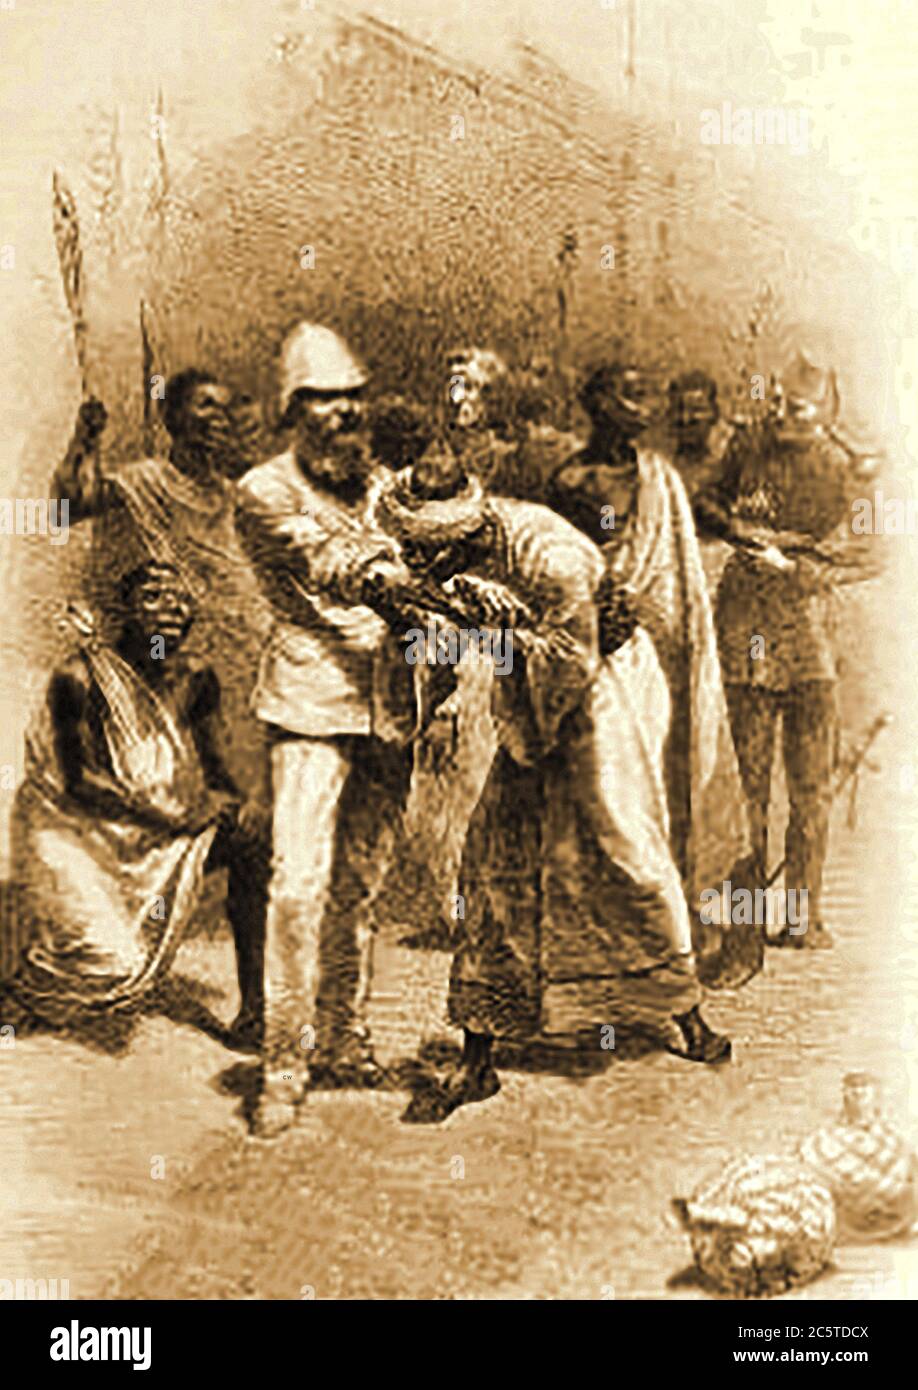 An 1880 illustration from the 'Illustrated Missionary News'. The magazine was formerly published under the title  The Pictorial missionary news edited by Henry Grattan Guinness (1835  - 1910) who was an Irish Protestant Christian preacher, evangelist and author (and others). This picture shows  a missionary undergoing a blood brother ceremony in Ethiopia. Stock Photo